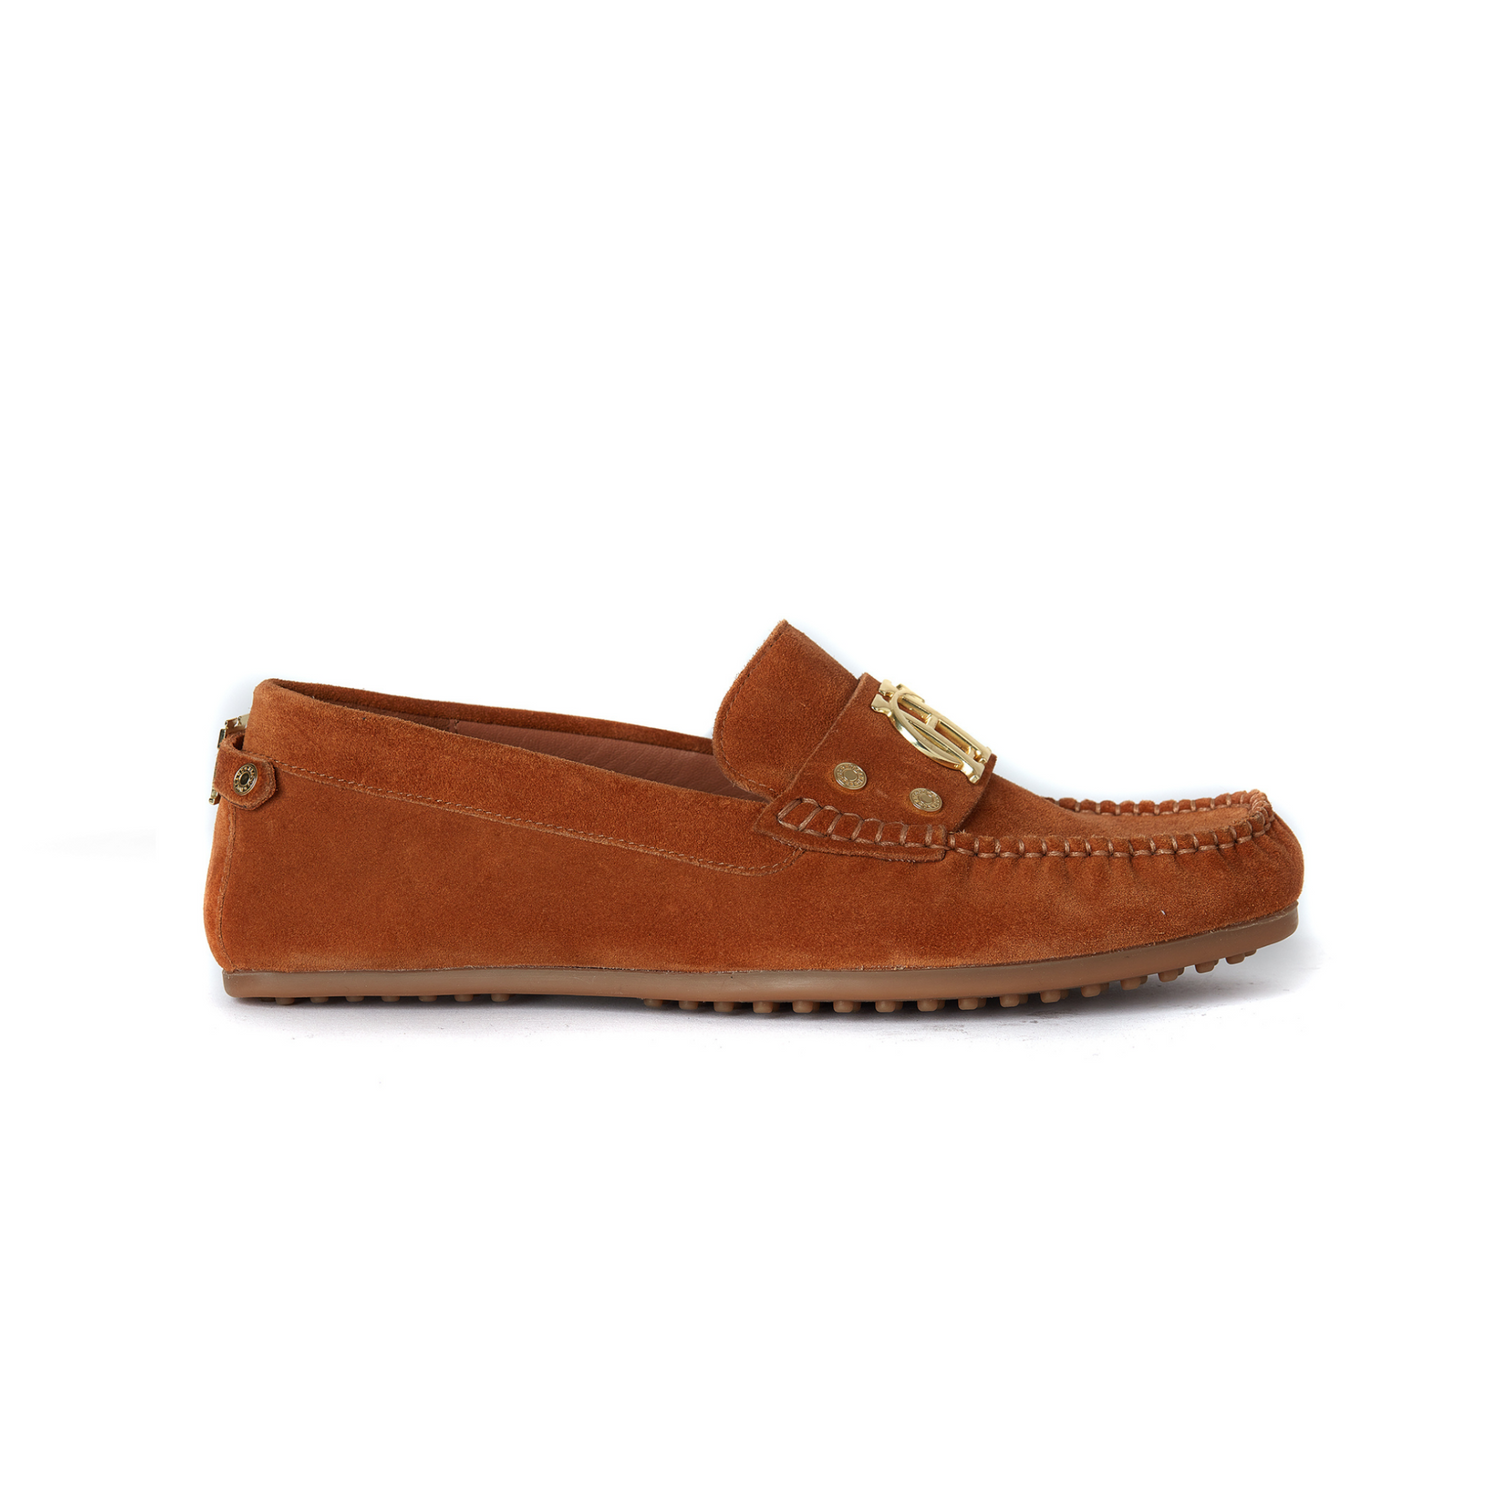 The Driving Loafer Tan Suede